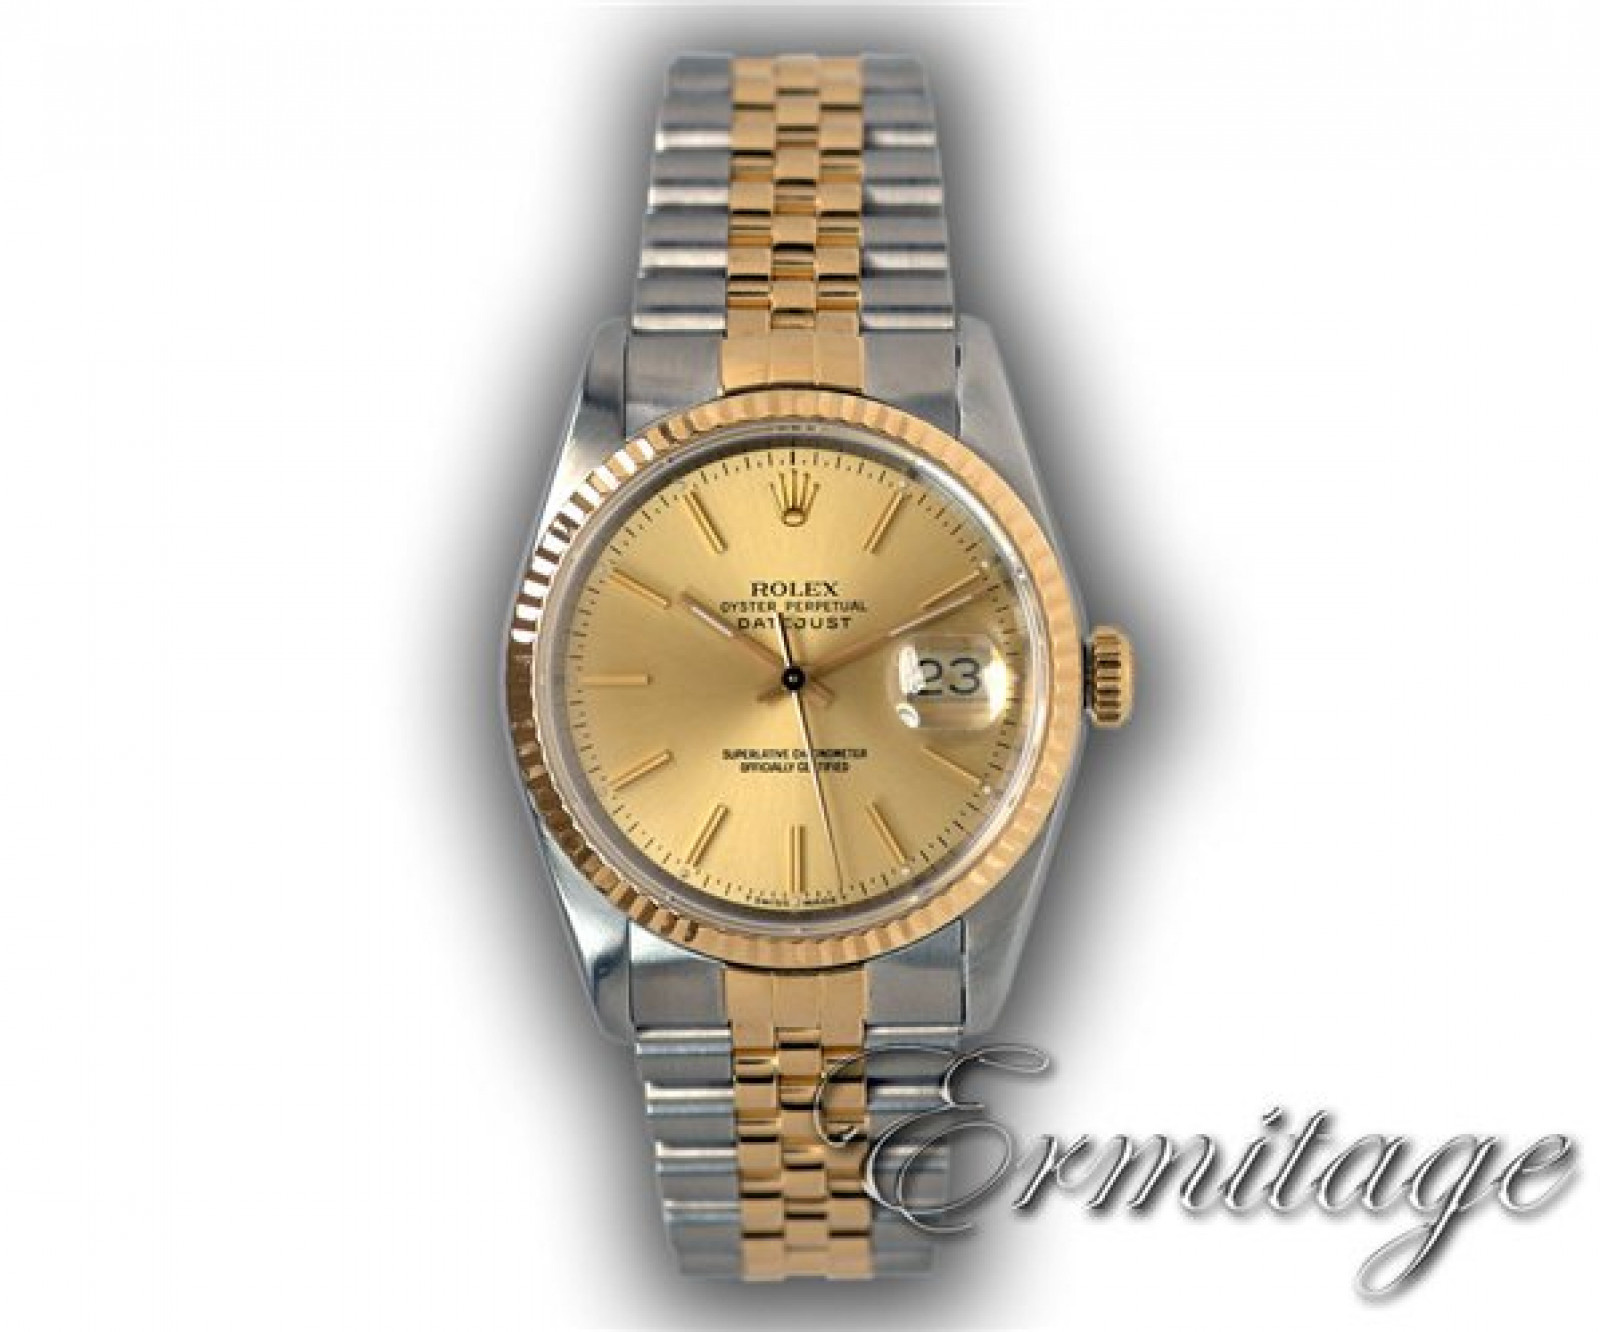 Serviced Pre-Owned Rolex Datejust 16233